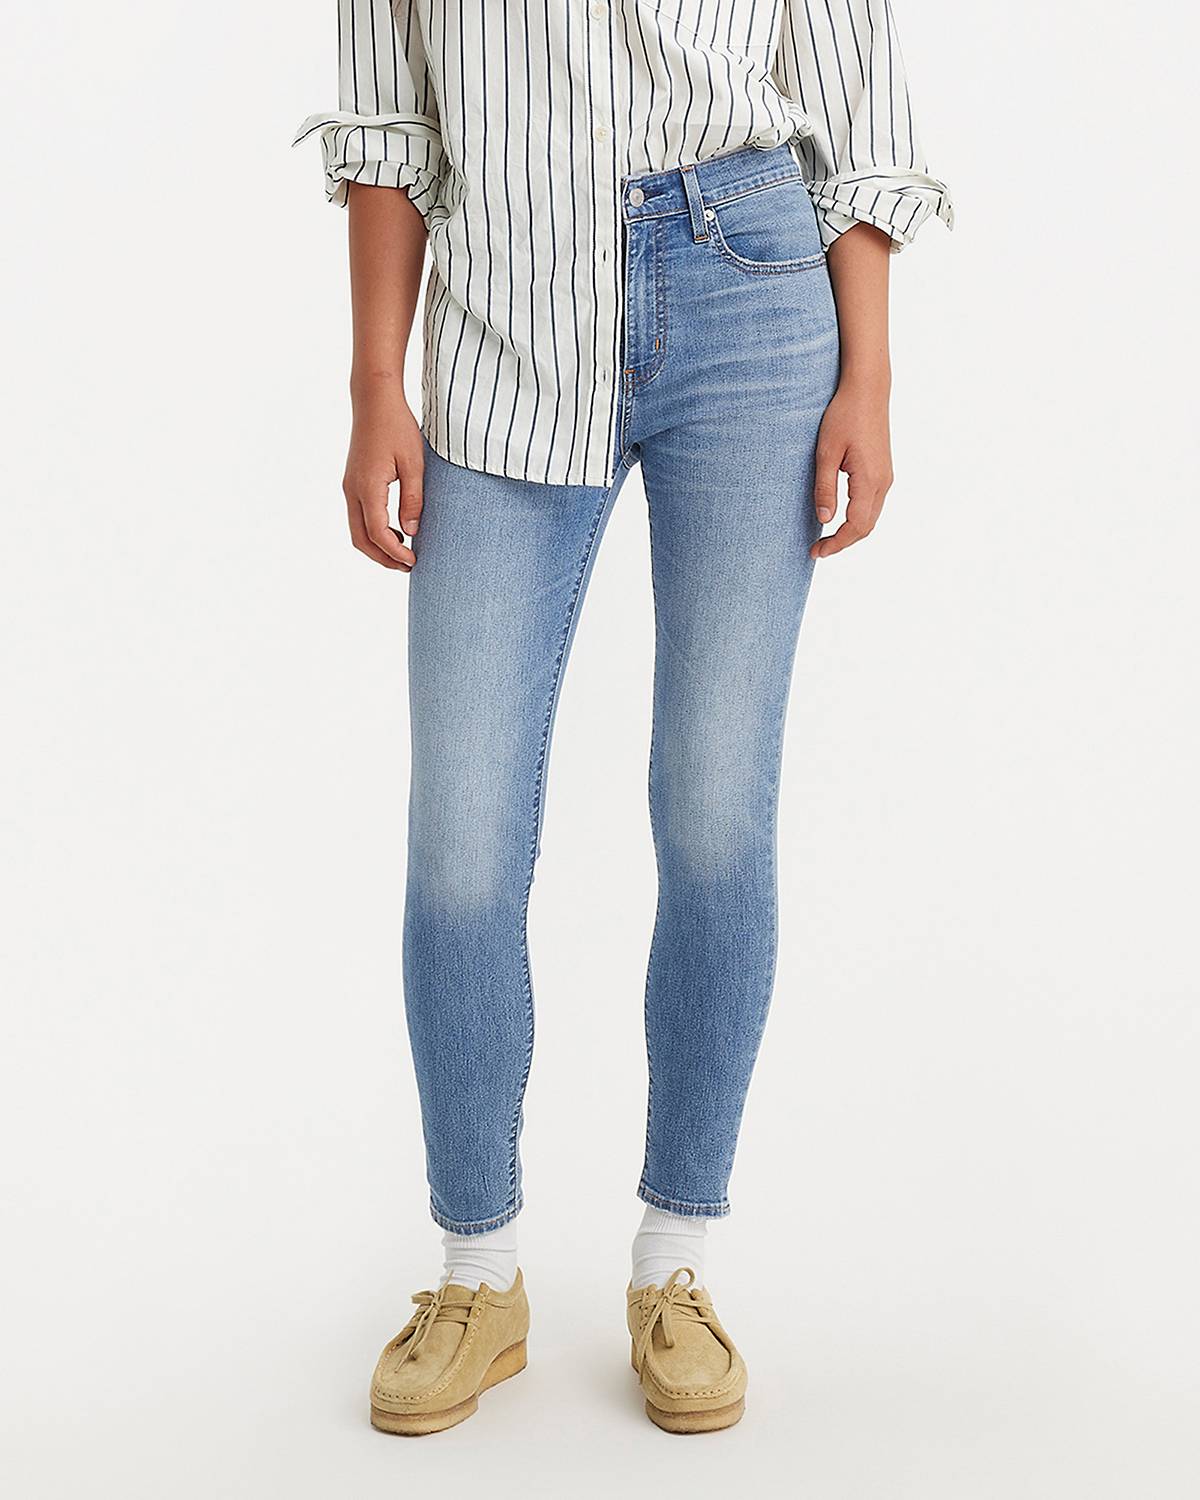 Ripped Jeans - Distressed Jeans - Ripped & Distressed Jeans for